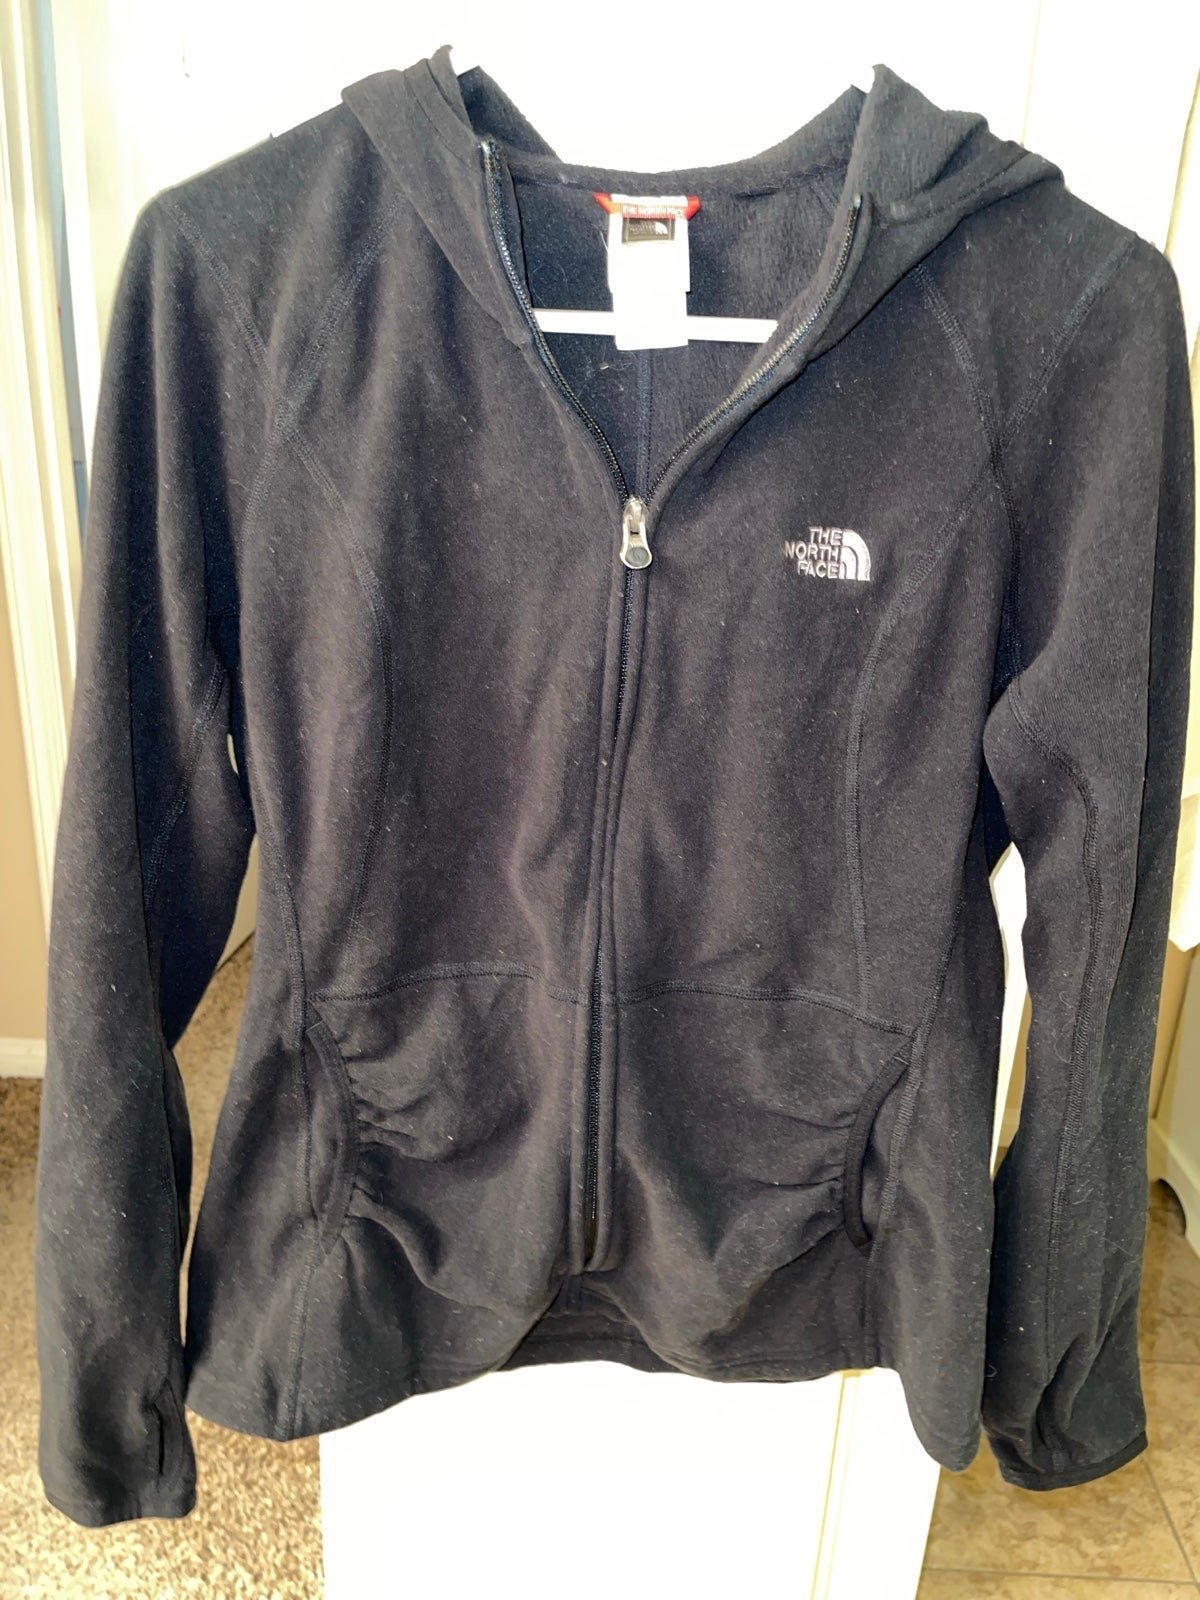 Discounted North Face Black Fleece Zip Up Hooded Jacket